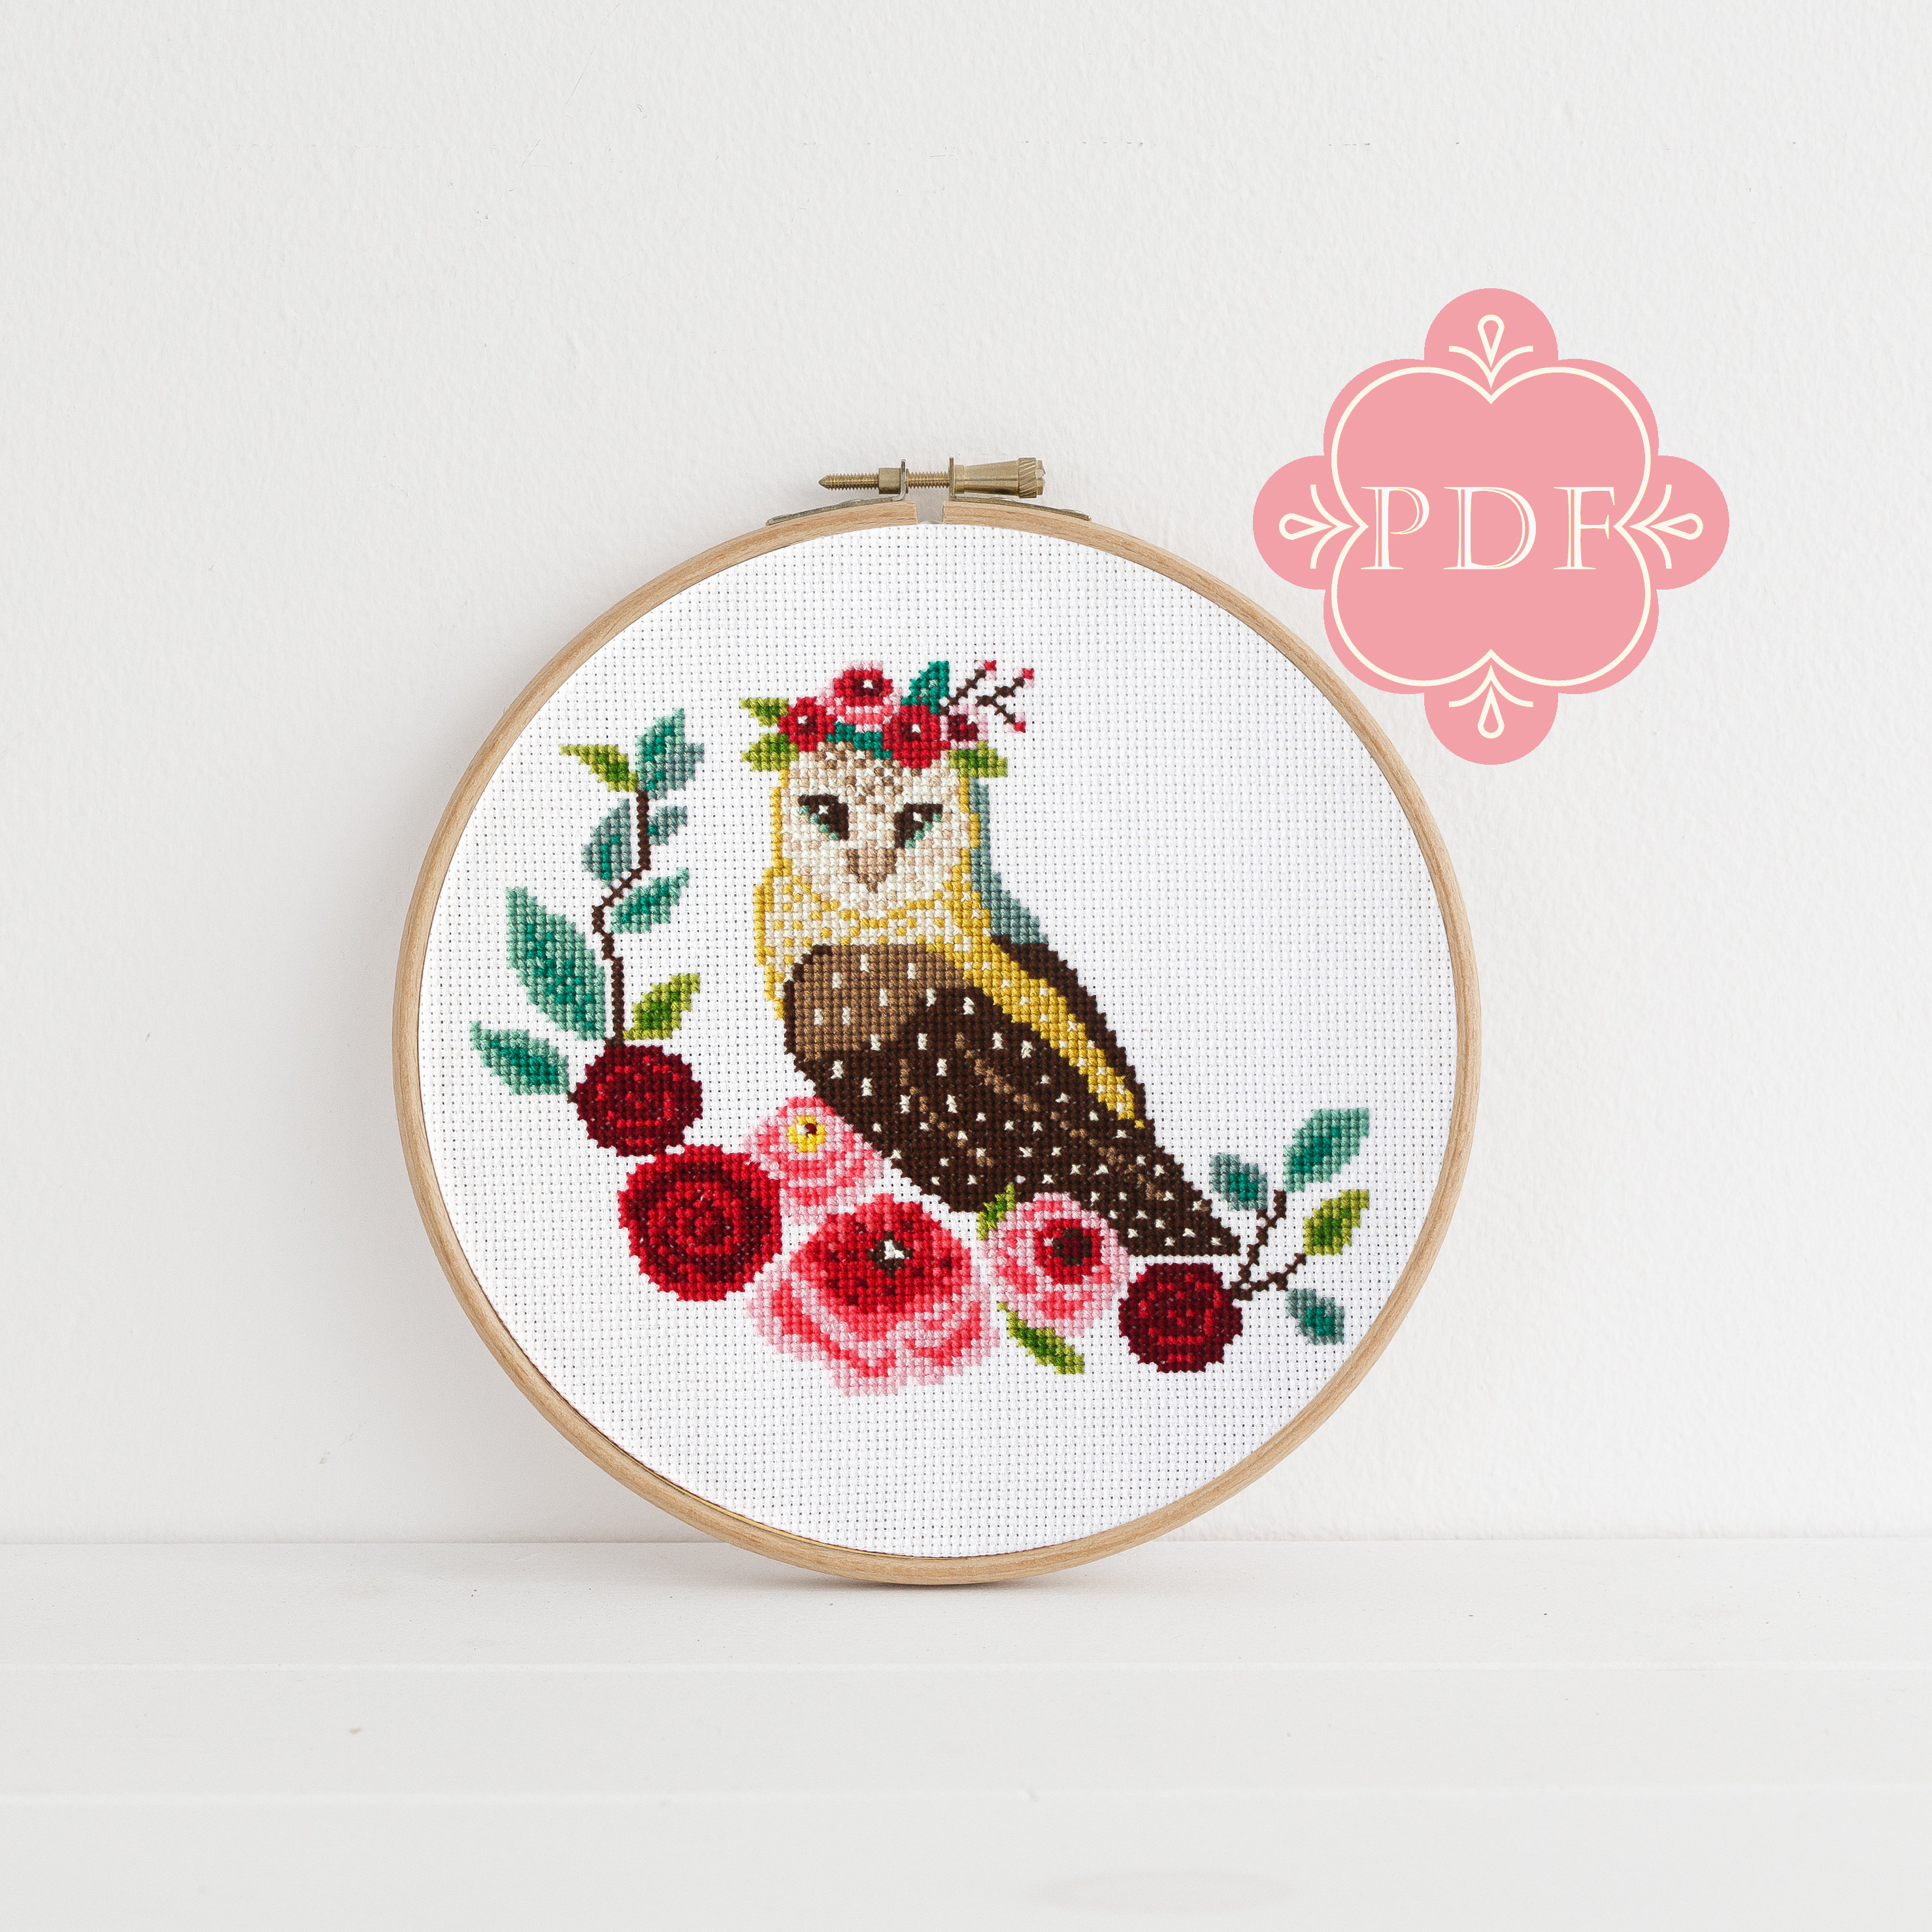 Dmc Embroidery Patterns Pdf Counted Cross Stitch Owl Owl Cross Stitch Diy How To